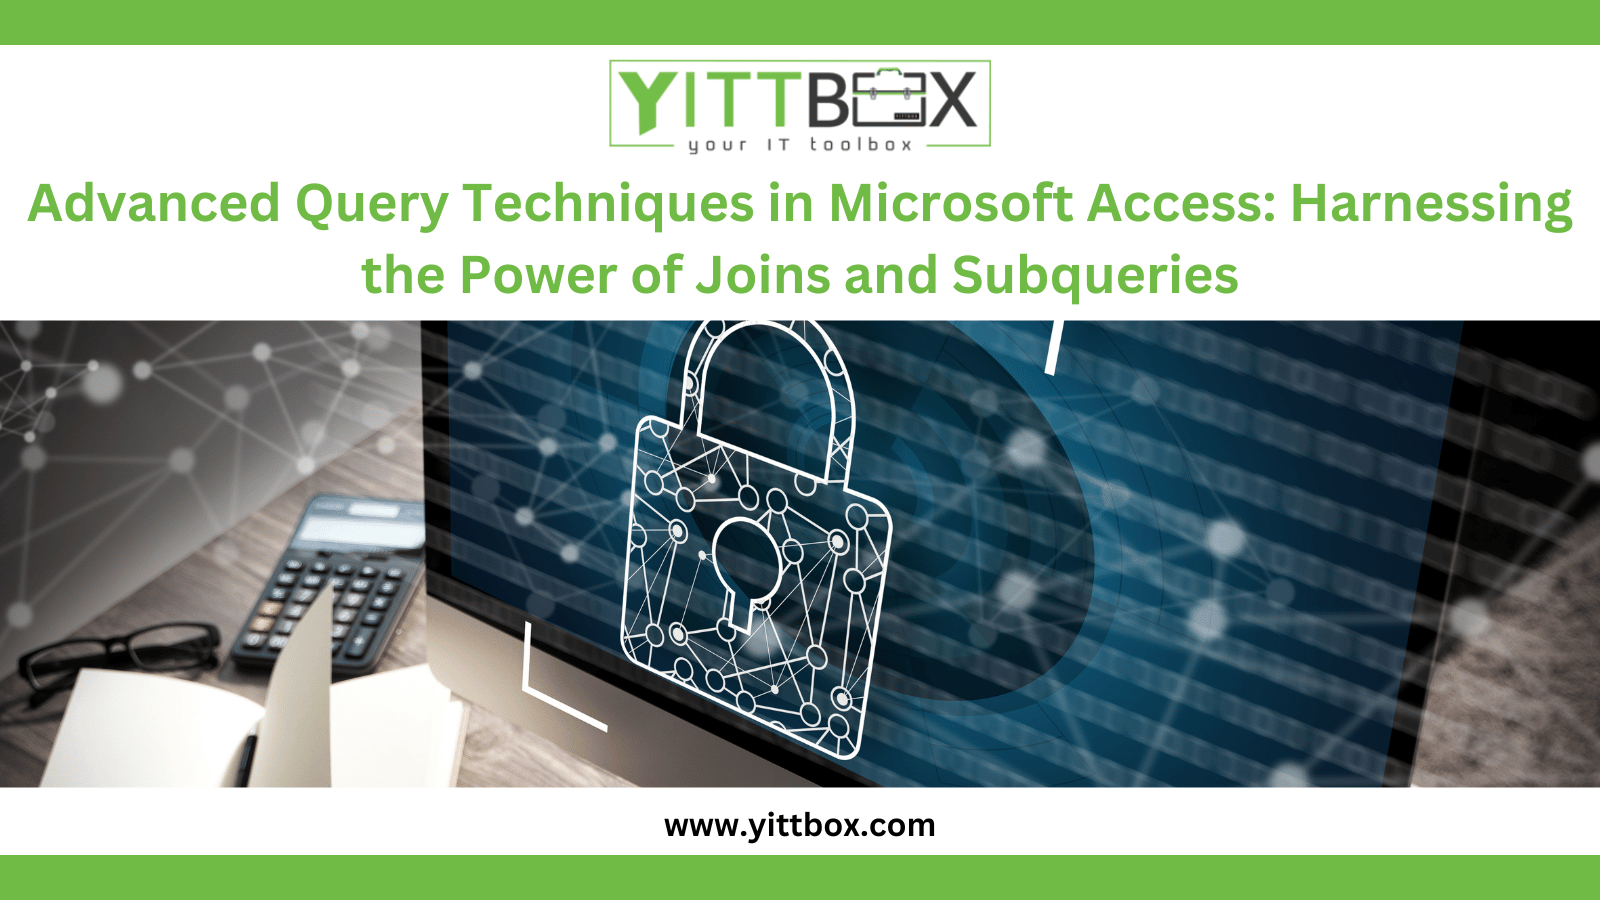 Advanced Query Techniques in Microsoft Access: Harnessing the Power of Joins and Subqueries